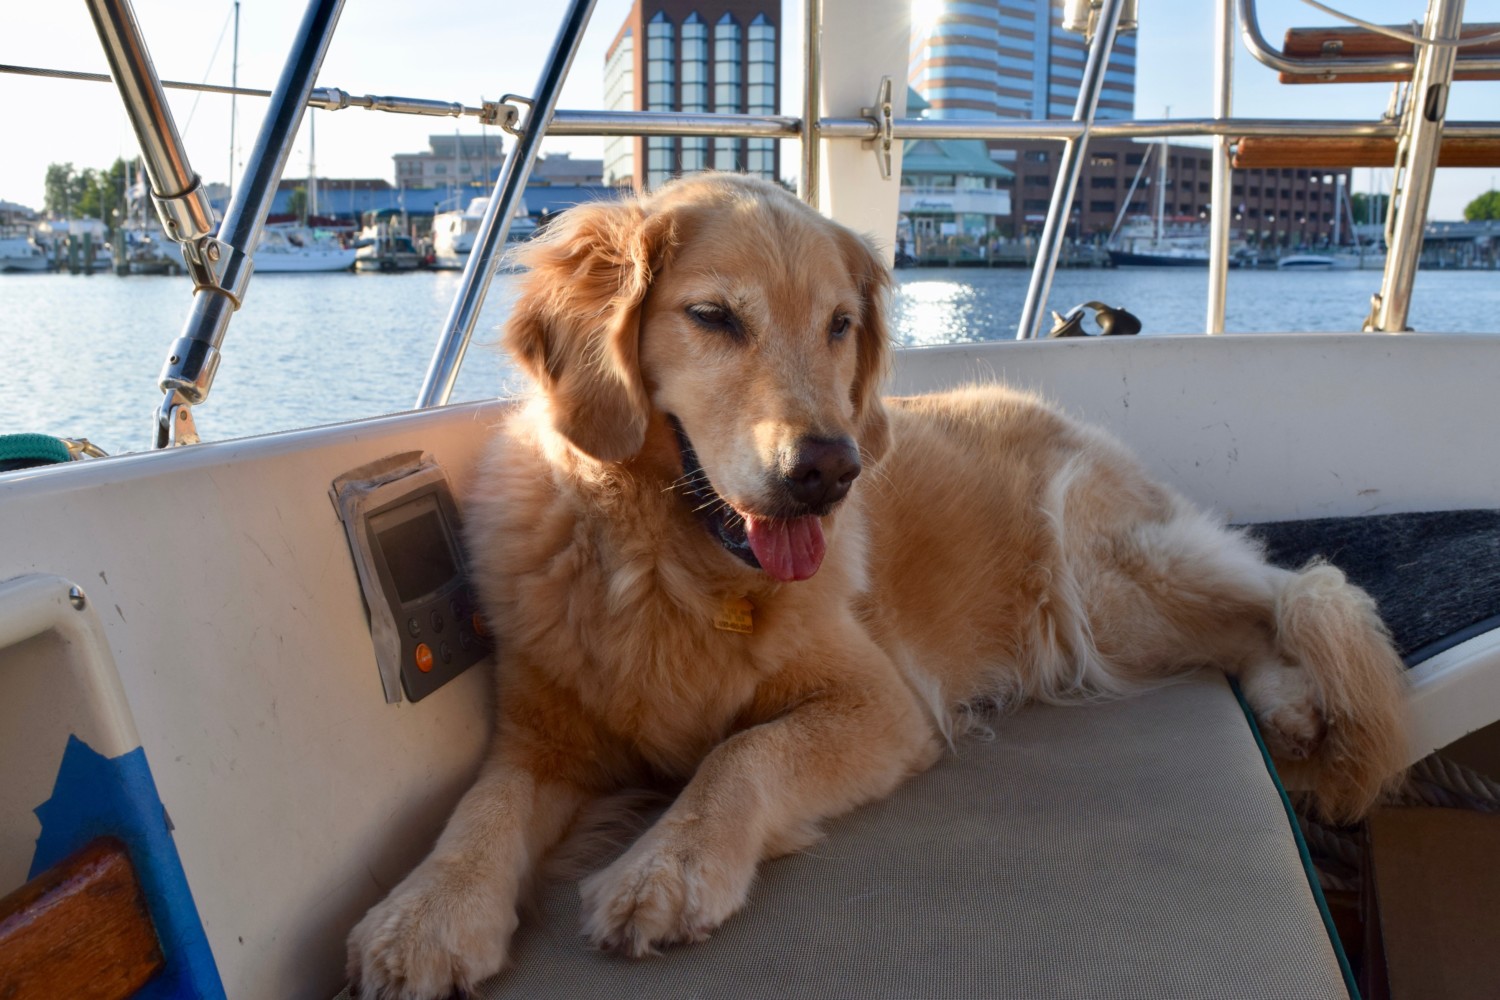 Taking Your Dog On A Boat? Ask These 5 Questions First | GoPetFriendly.com